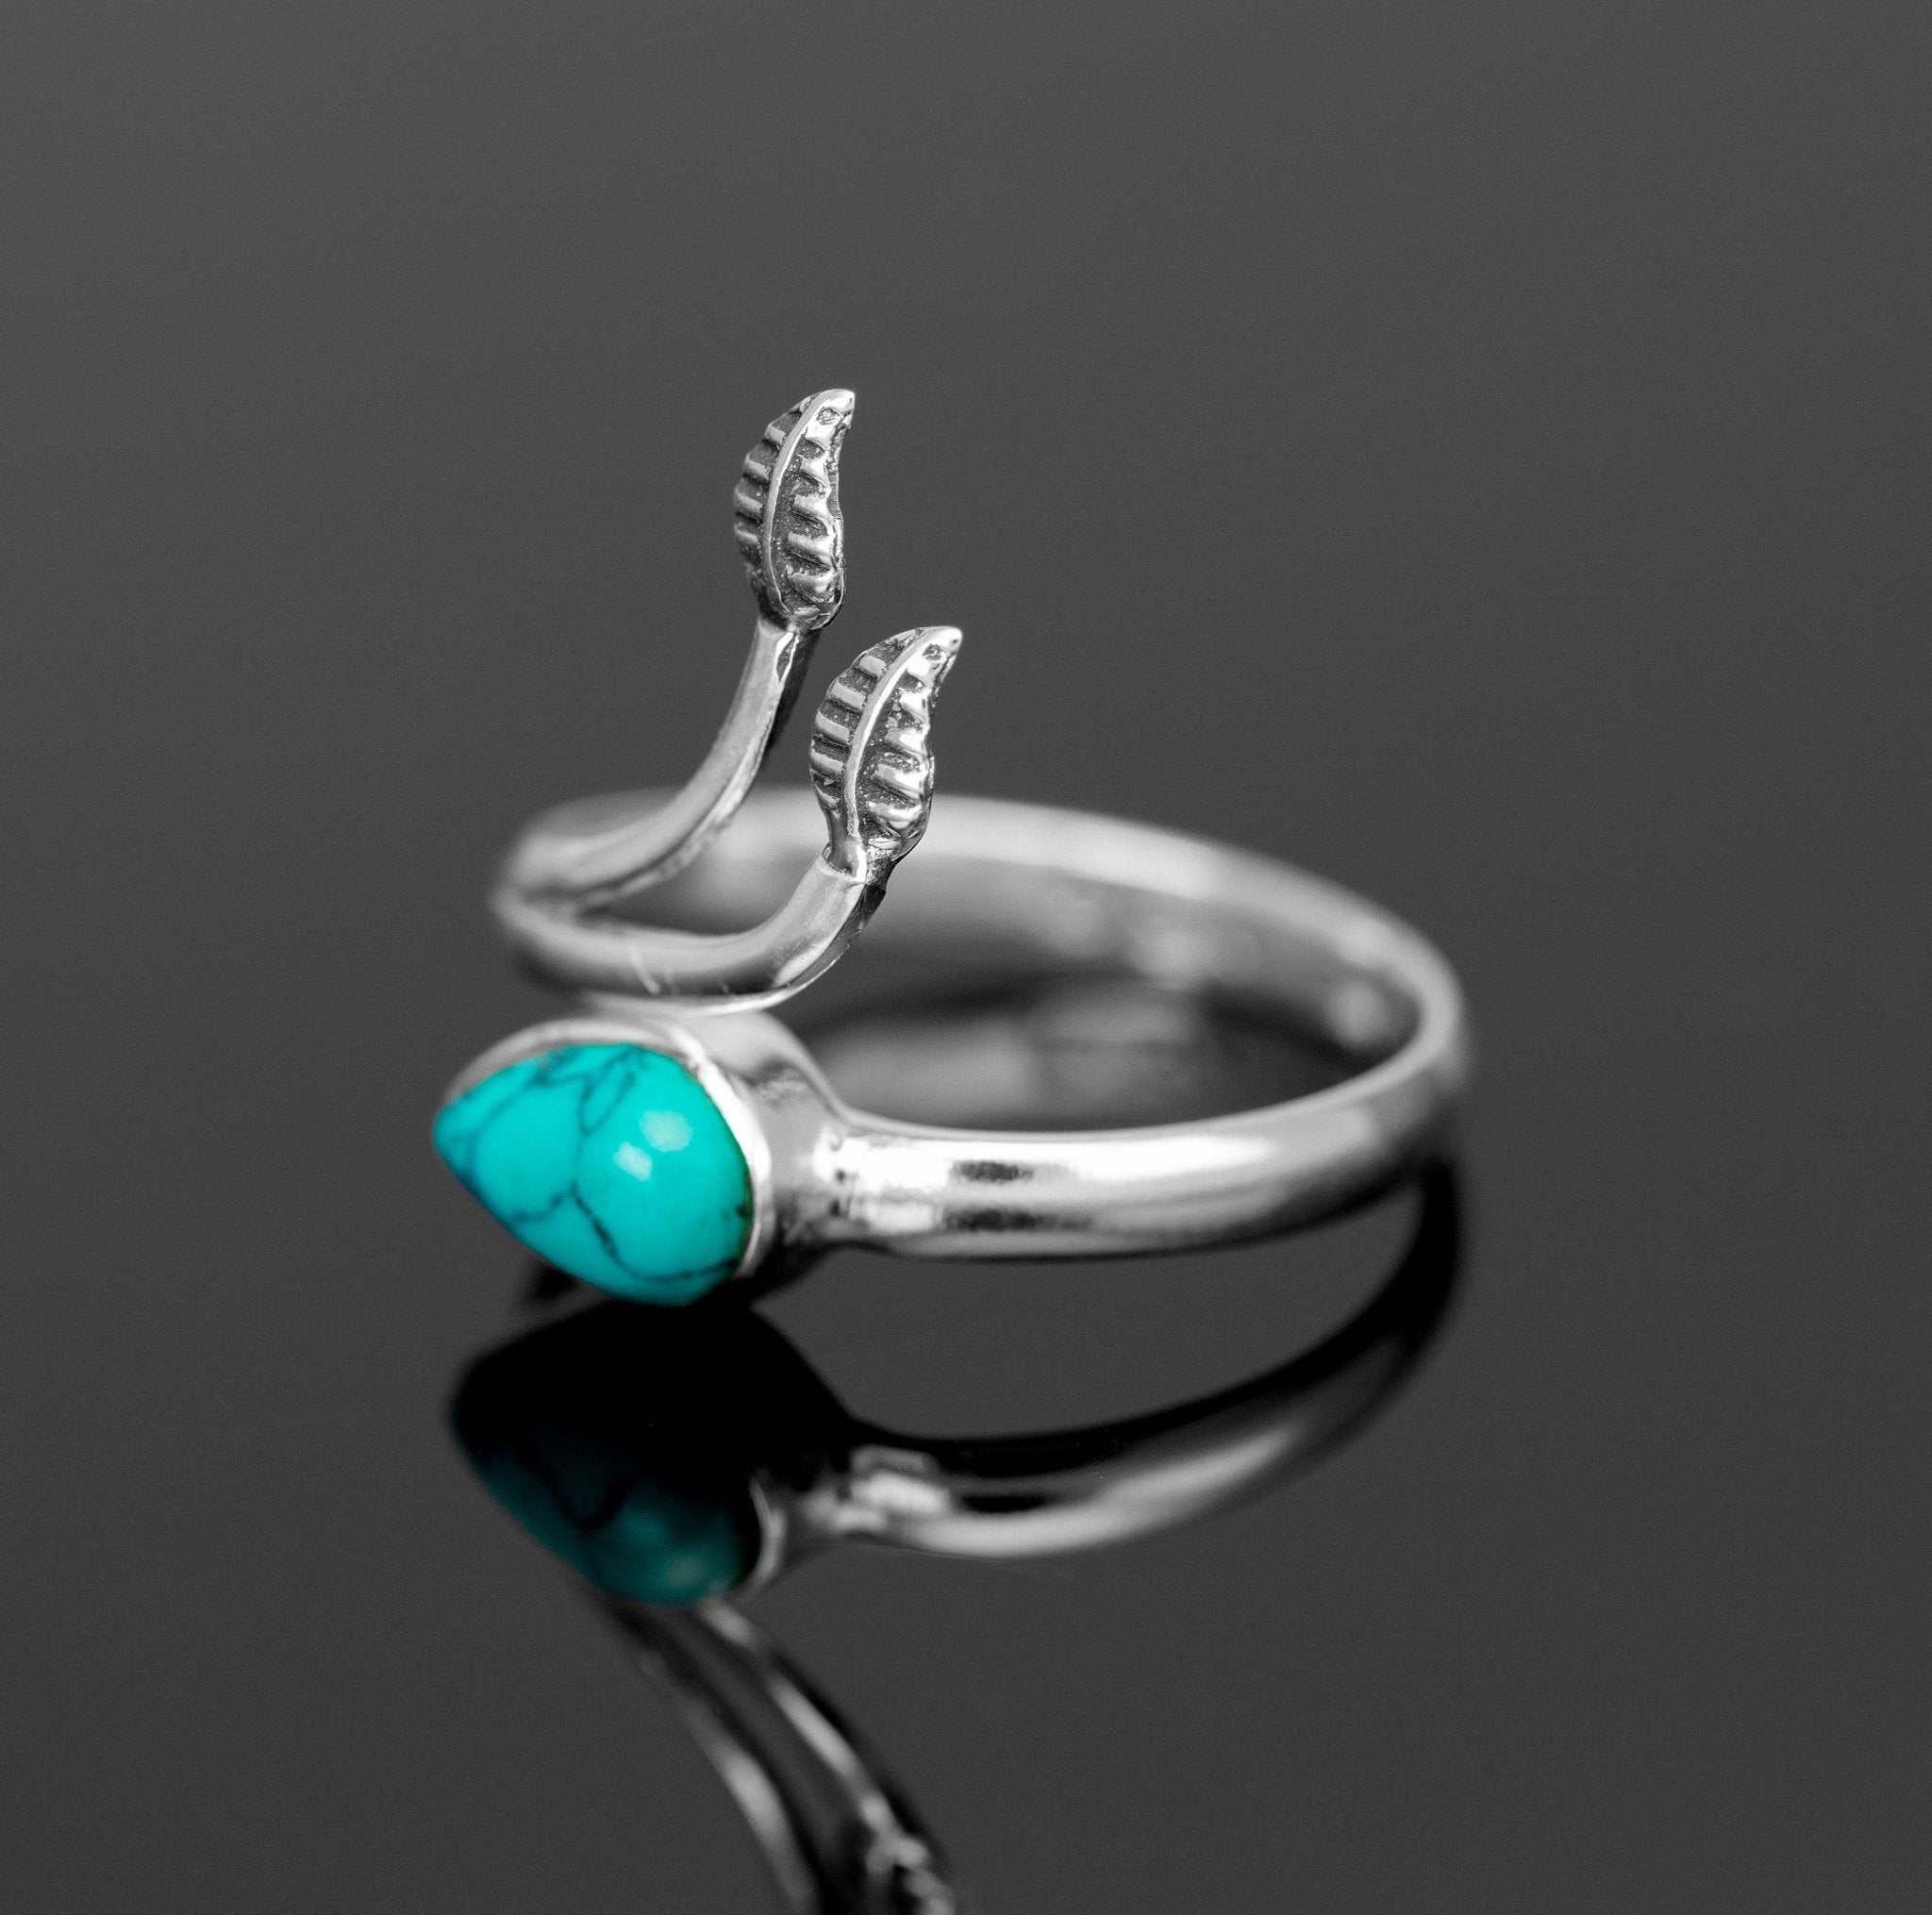 Adjustable Sterling Silver Turquoise Gemstone Leaf Ring Ladies Gift Jewellery Boxed Jewelry